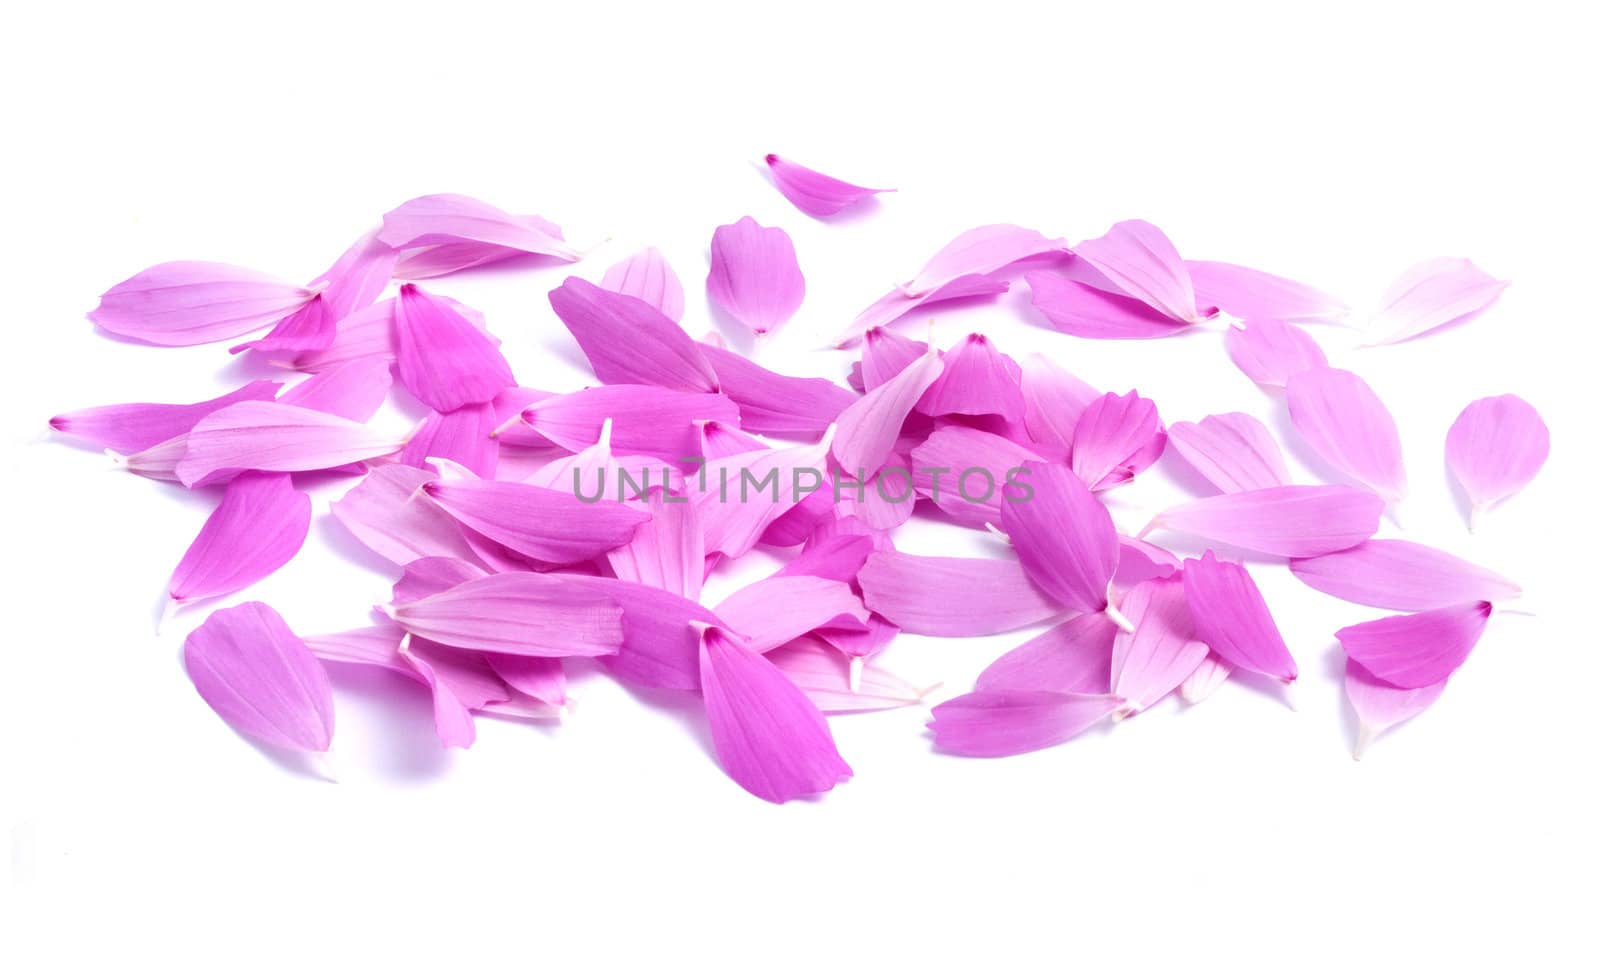 Petals of flowers isolated on white background